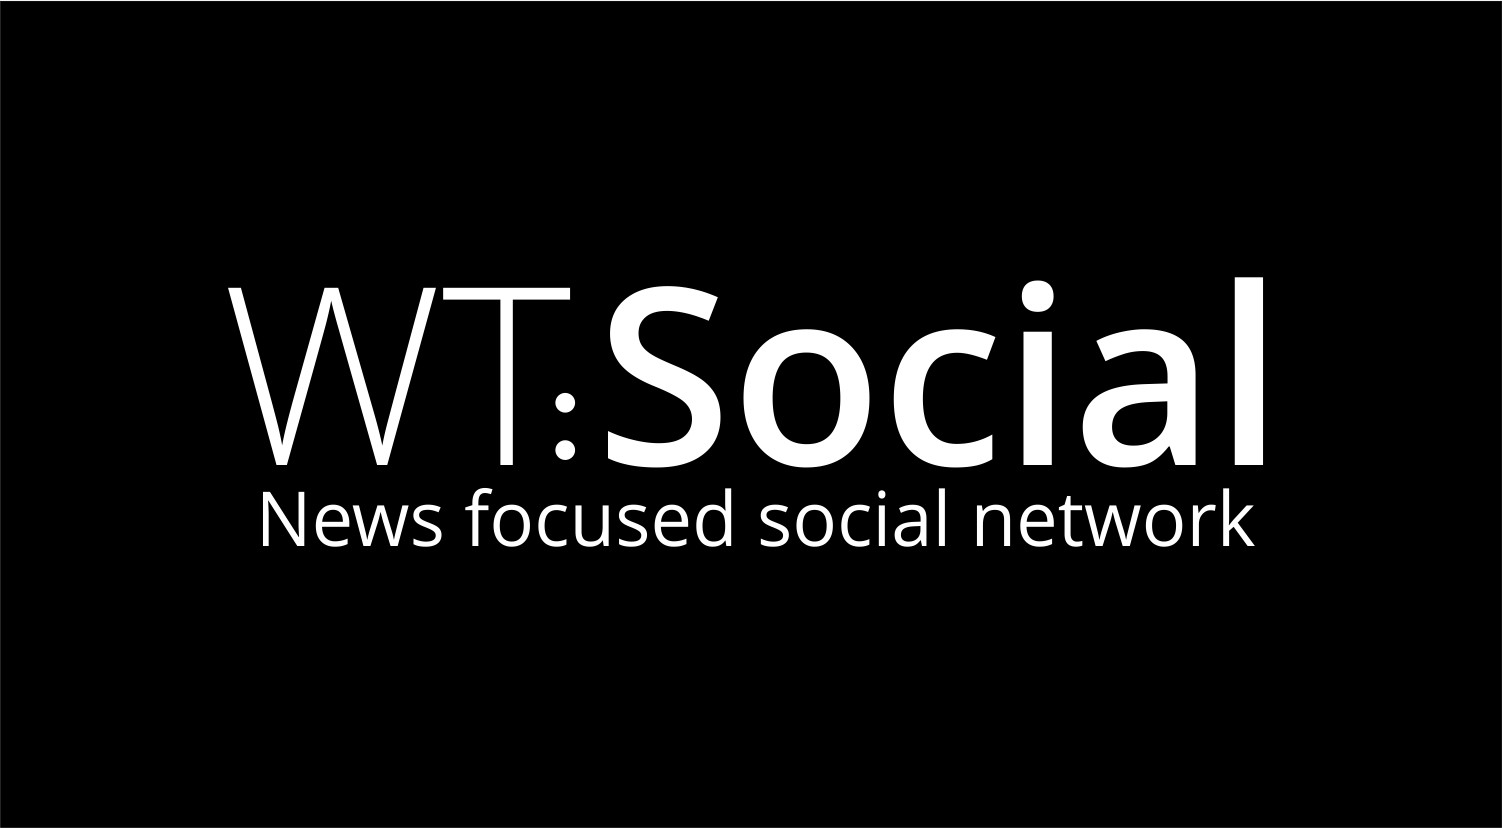 You are currently viewing A brief overview of WT.Social